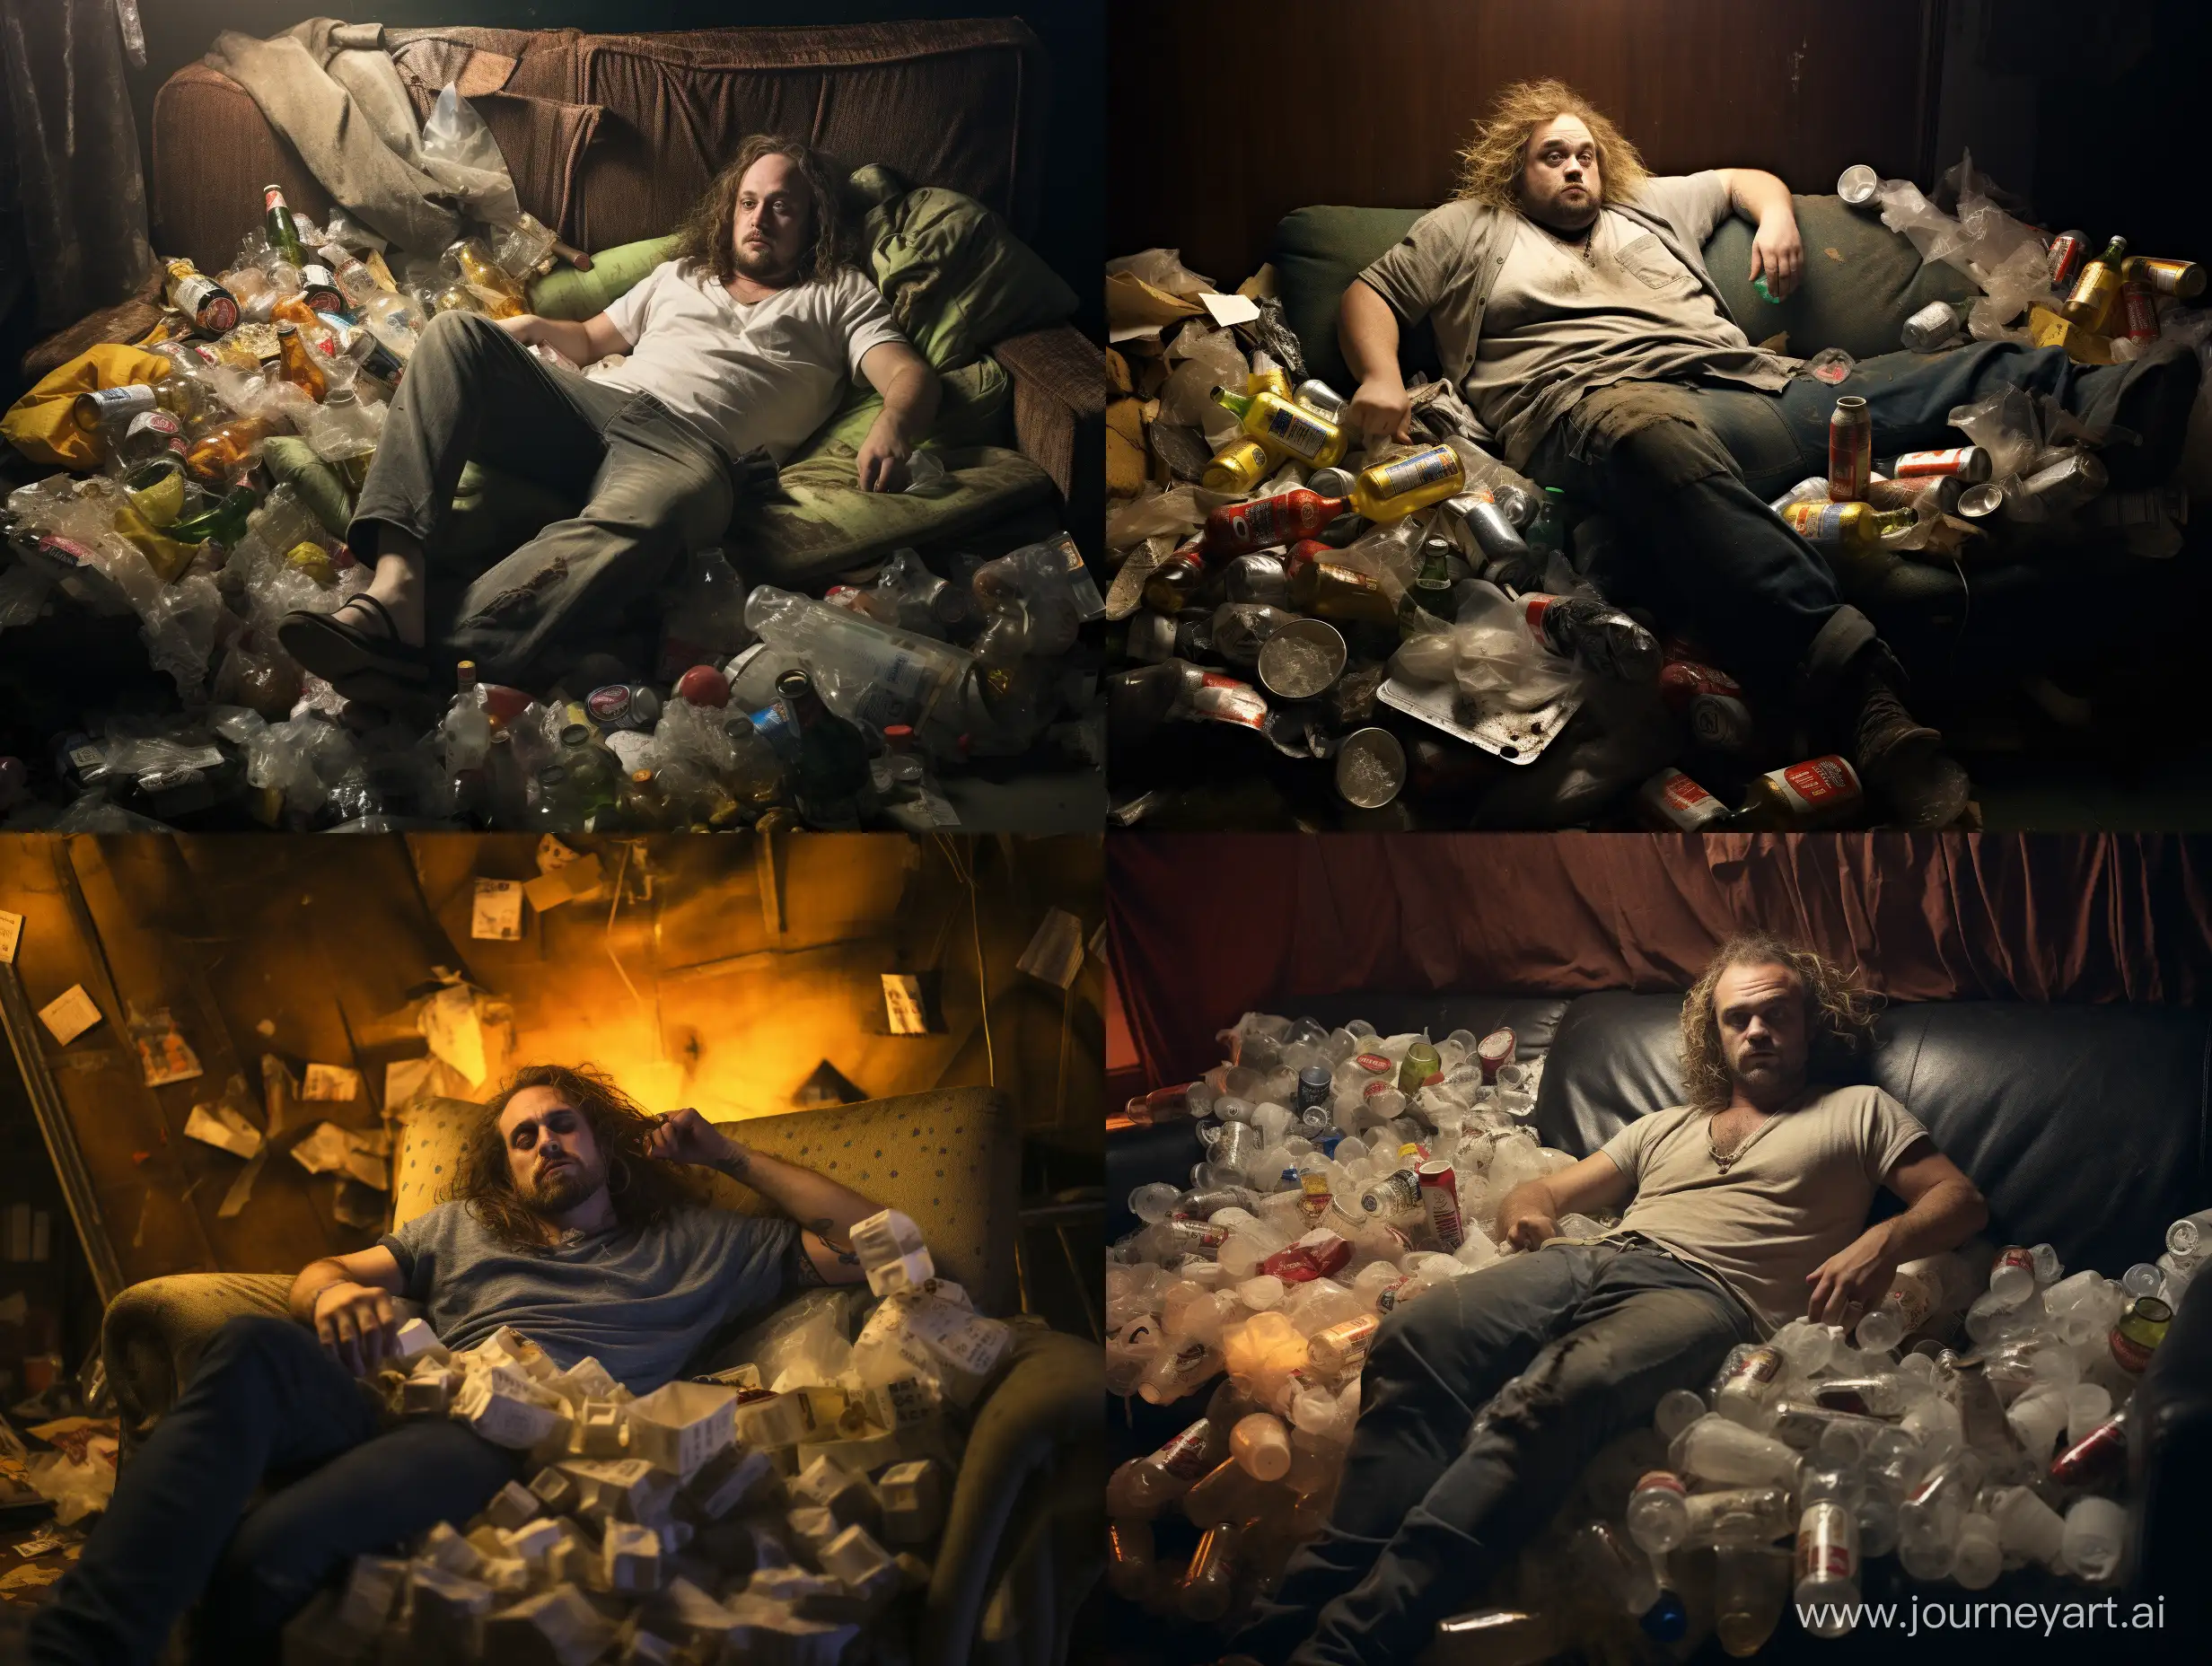 A full man sitting on a dirty couch
with a bottle in his hand. The room
is very dirty and there is garbage,
cigarette butts and food and pizza
wrappers everywhere. The room
is dimly lit. The image is
depressing, cold. Photographed
on a kodak.